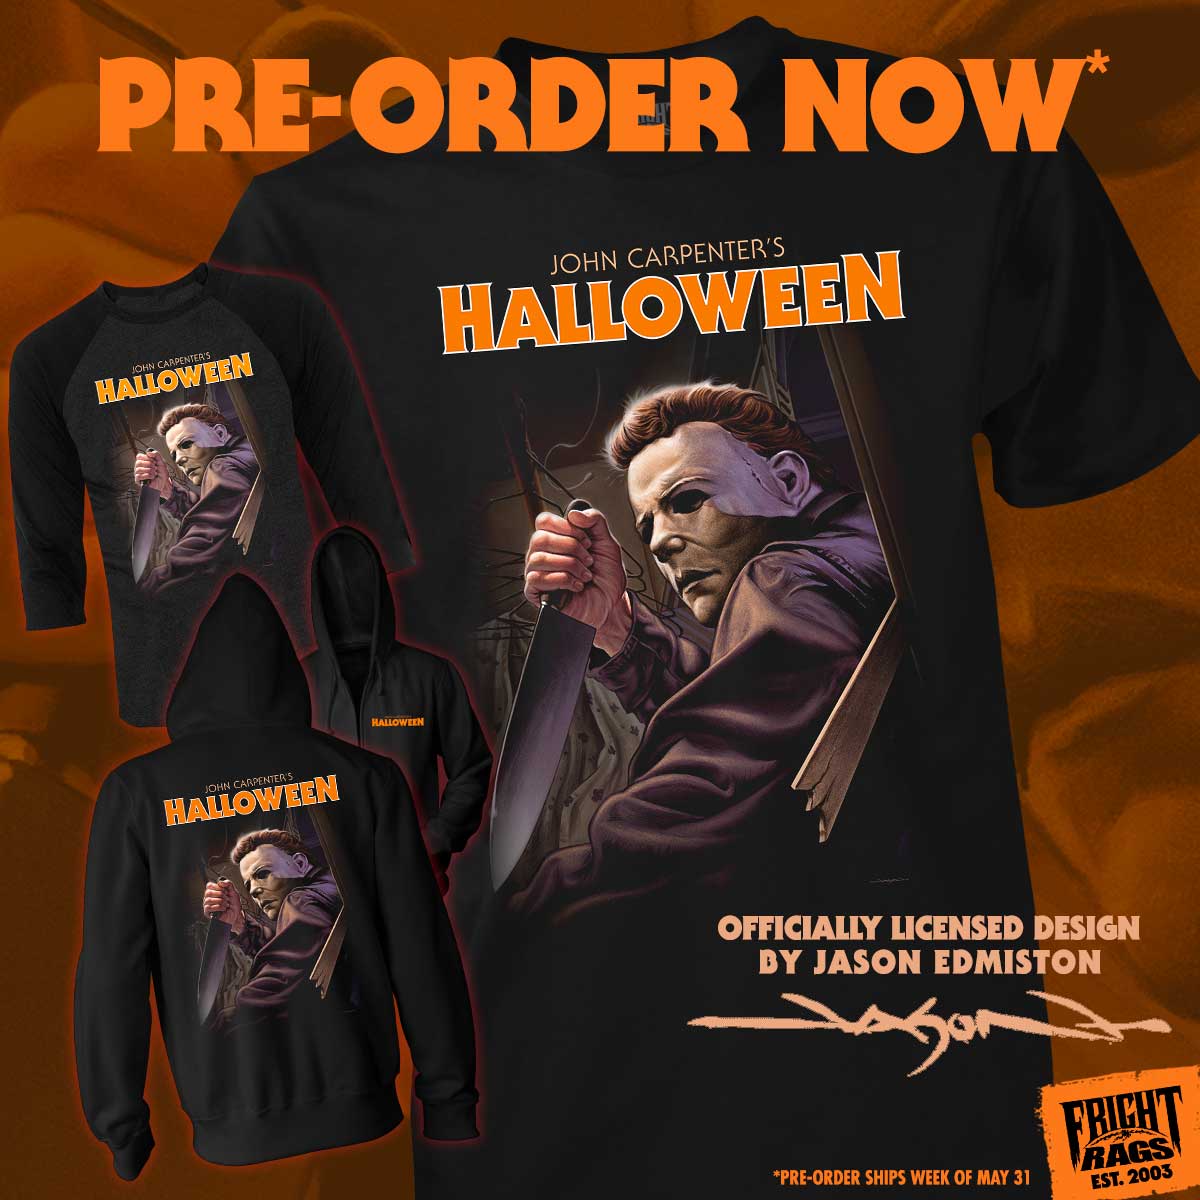 🎃🔪 HALLOWEEN shirts featuring Jason Edmiston's orange-tinted variant design are now available to pre-order on super-soft black t-shirts, retro baseball tees & cozy zippered hoodies. 👉 SHOP: bit.ly/3WqGm4h